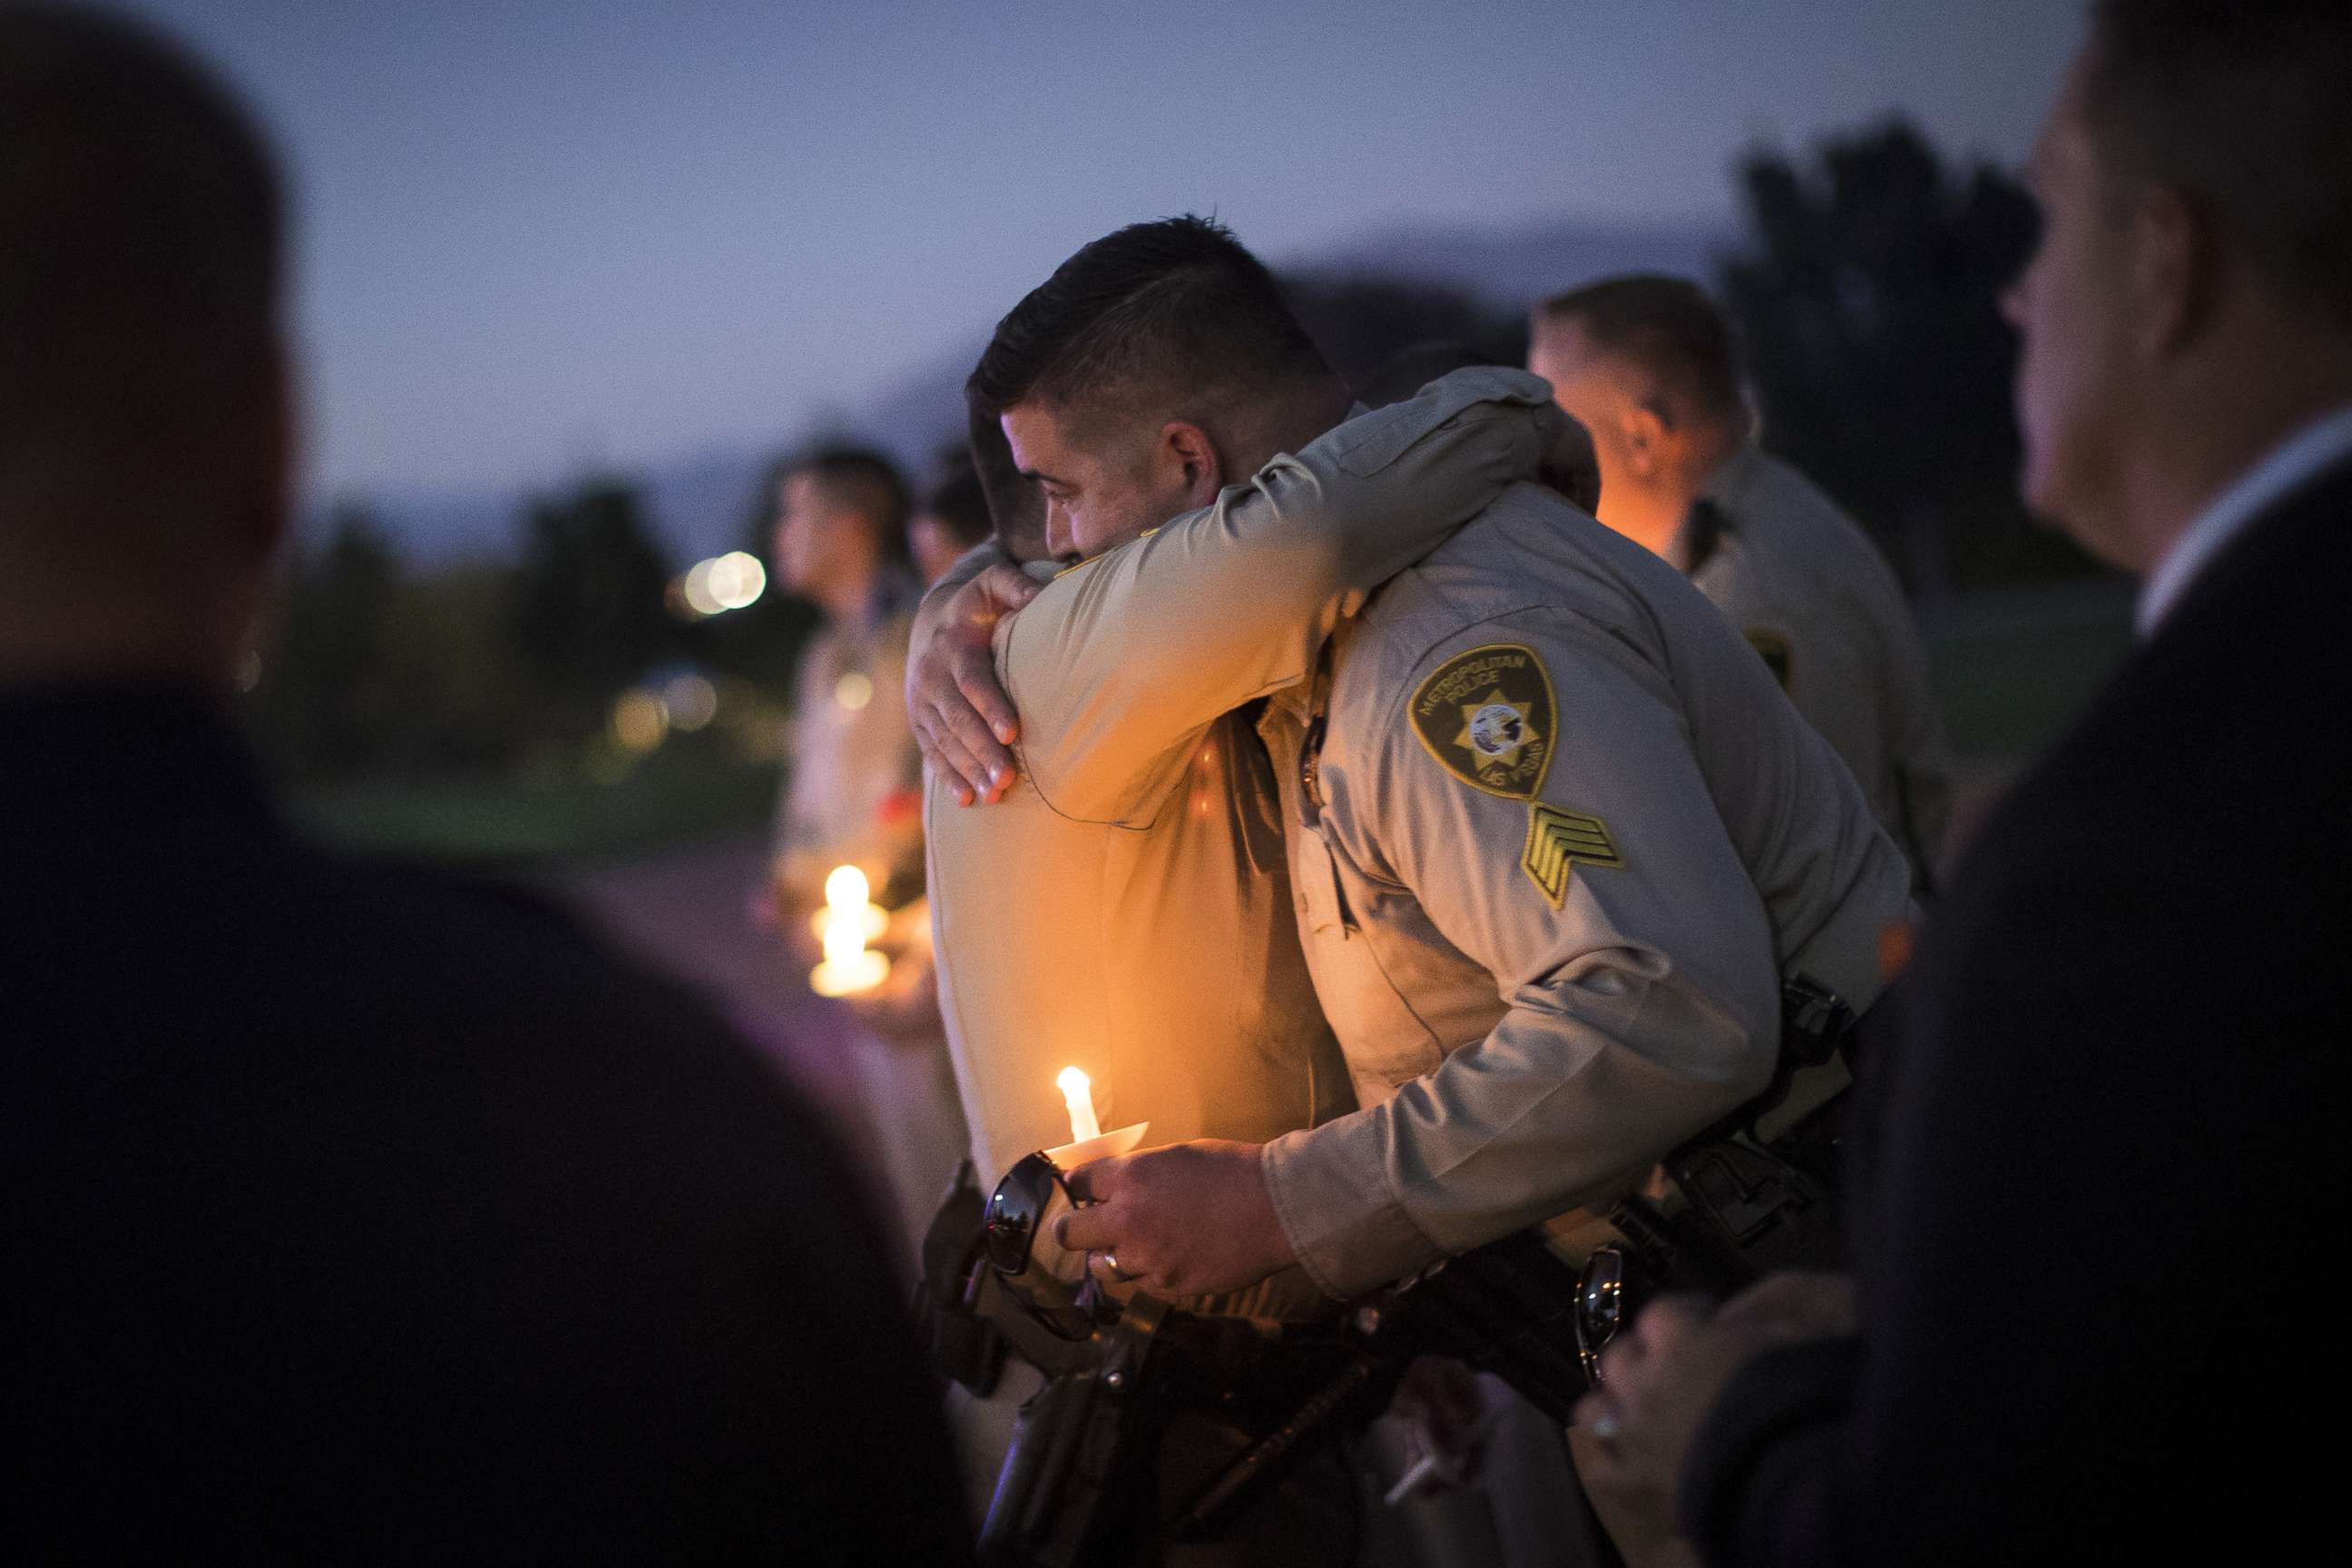 PHOTO: Sgt. Ryan Fryman, who was on the scene of the mass shooting, hugs a fellow officer during a vigil, Oct. 5, 2017 in Las Vegas for Police Officer Charleston Hartfield, who was killed when a gunman opened fire on a crowd attending a music festival.  